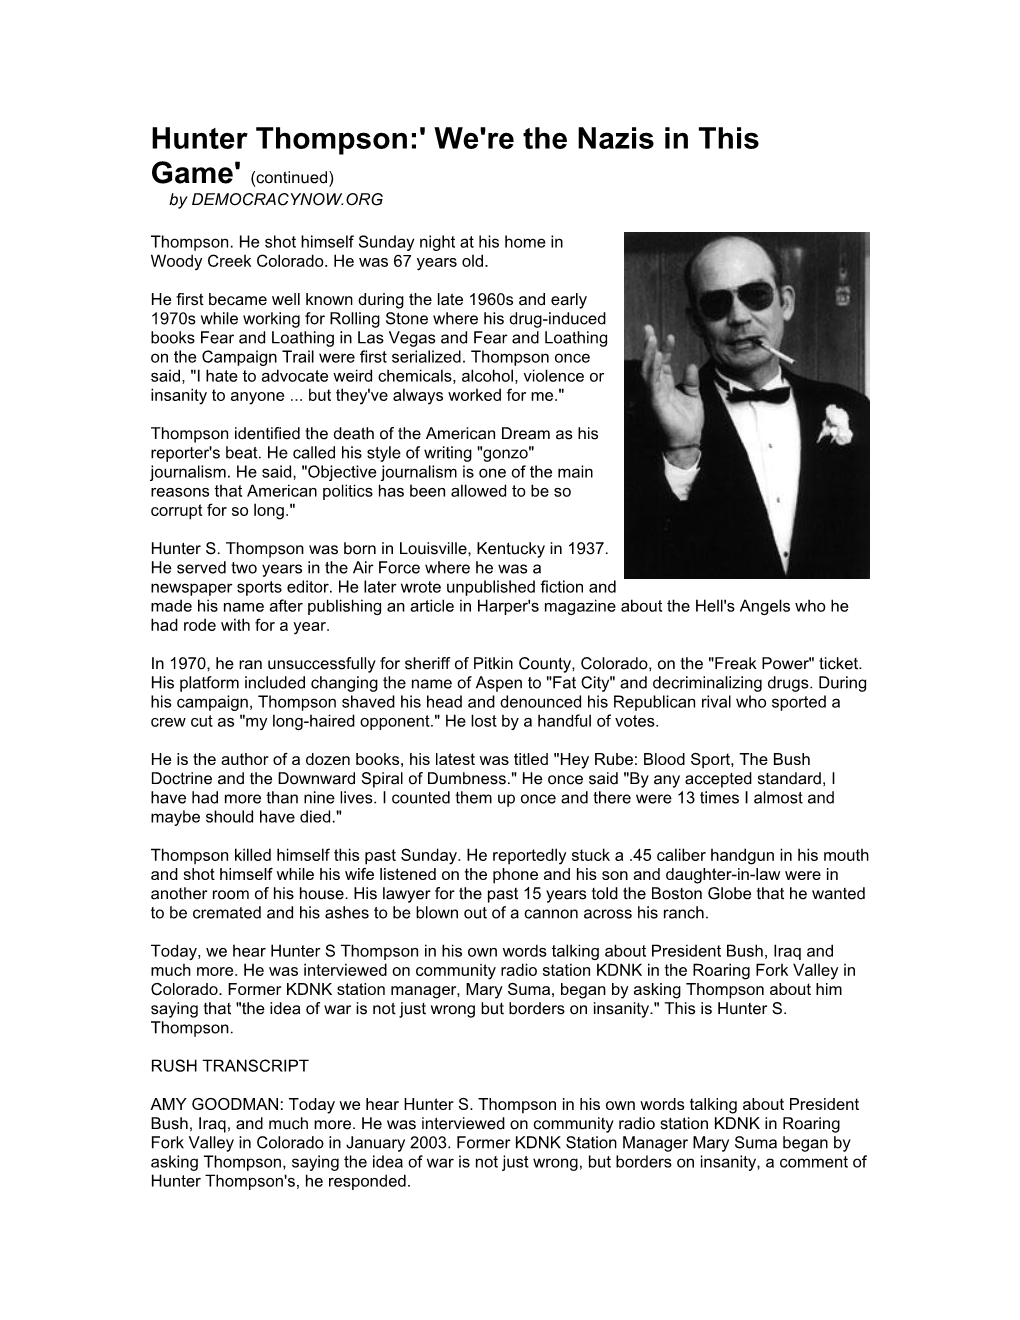 Hunter Thompson:' We're the Nazis in This Game' (Continued) by DEMOCRACYNOW.ORG